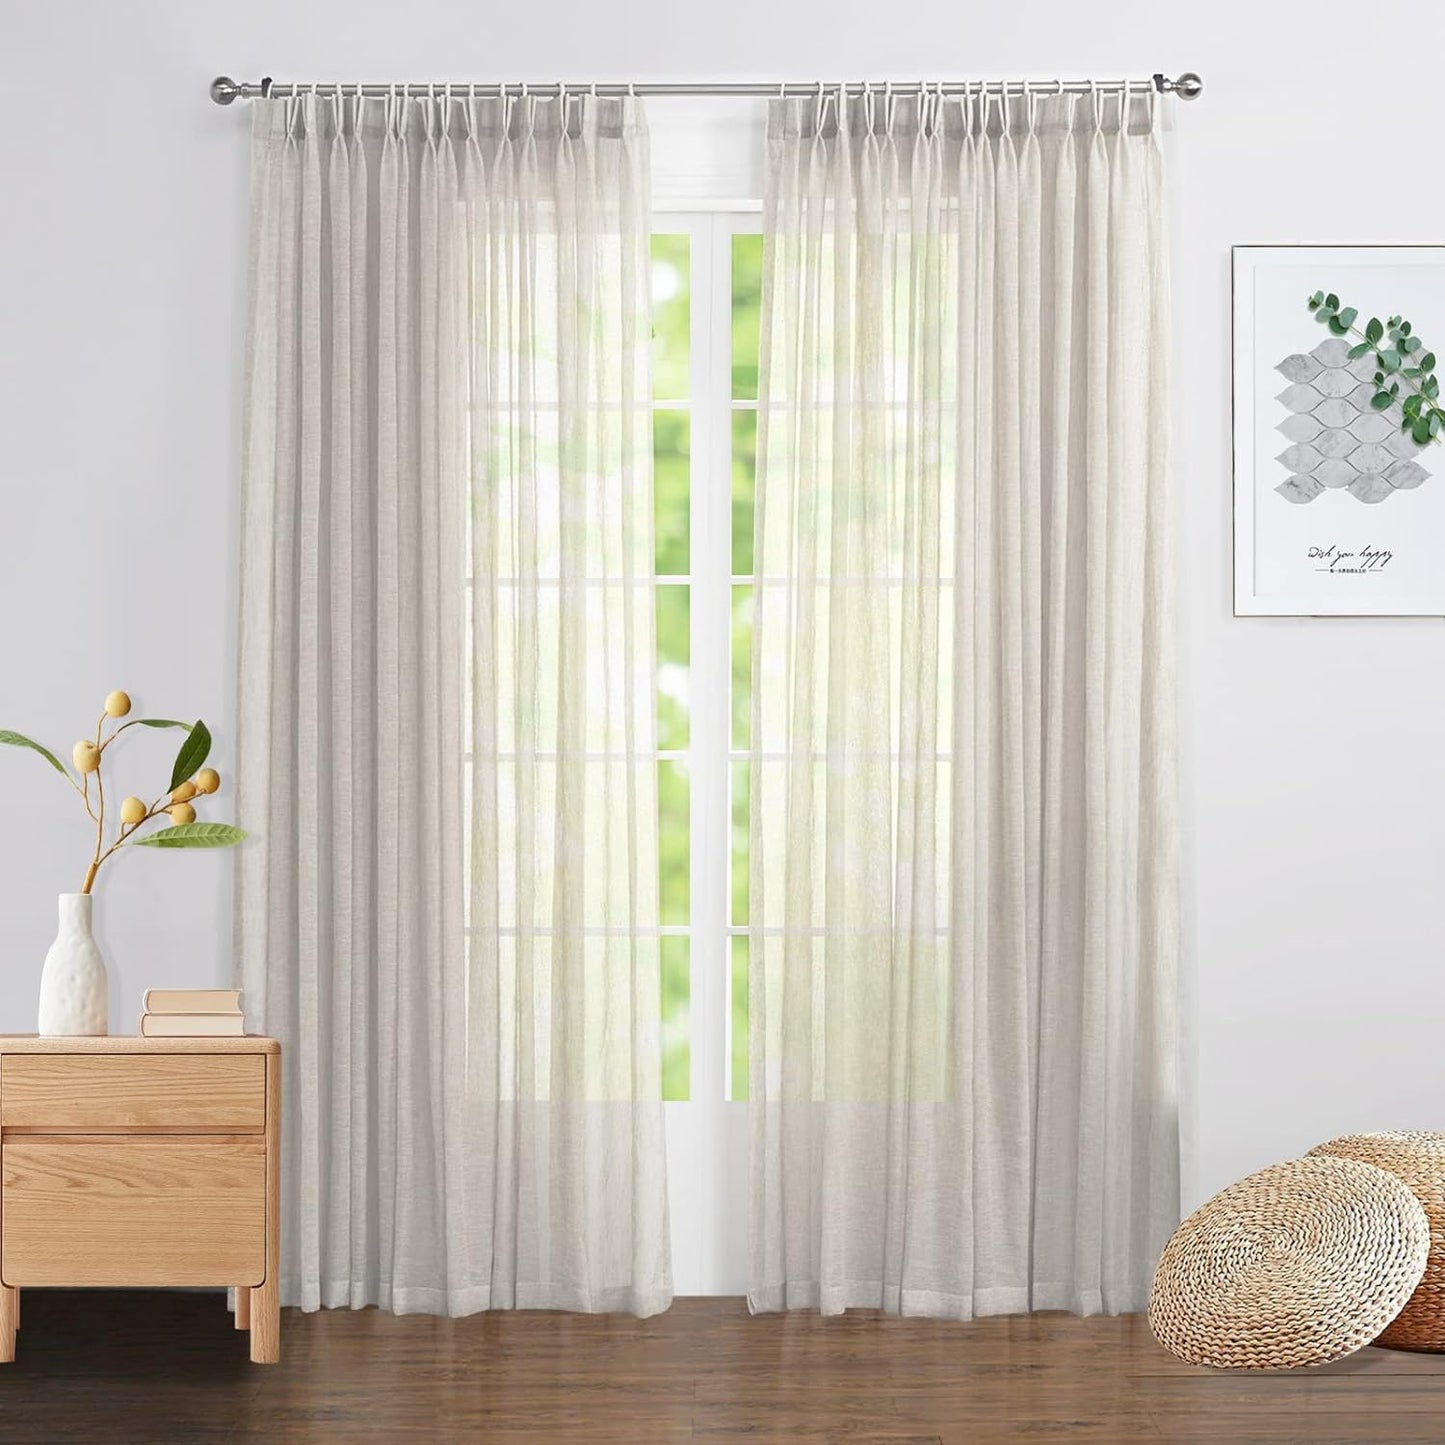 LANTIME Pinch Pleats Sheer Curtains, Faux Linen Extra Long Window Sheer Curtains Panels Drapery for Home, Hotel, Office, 52" W X 102" L, Set of 2, Camel  LANTIME   